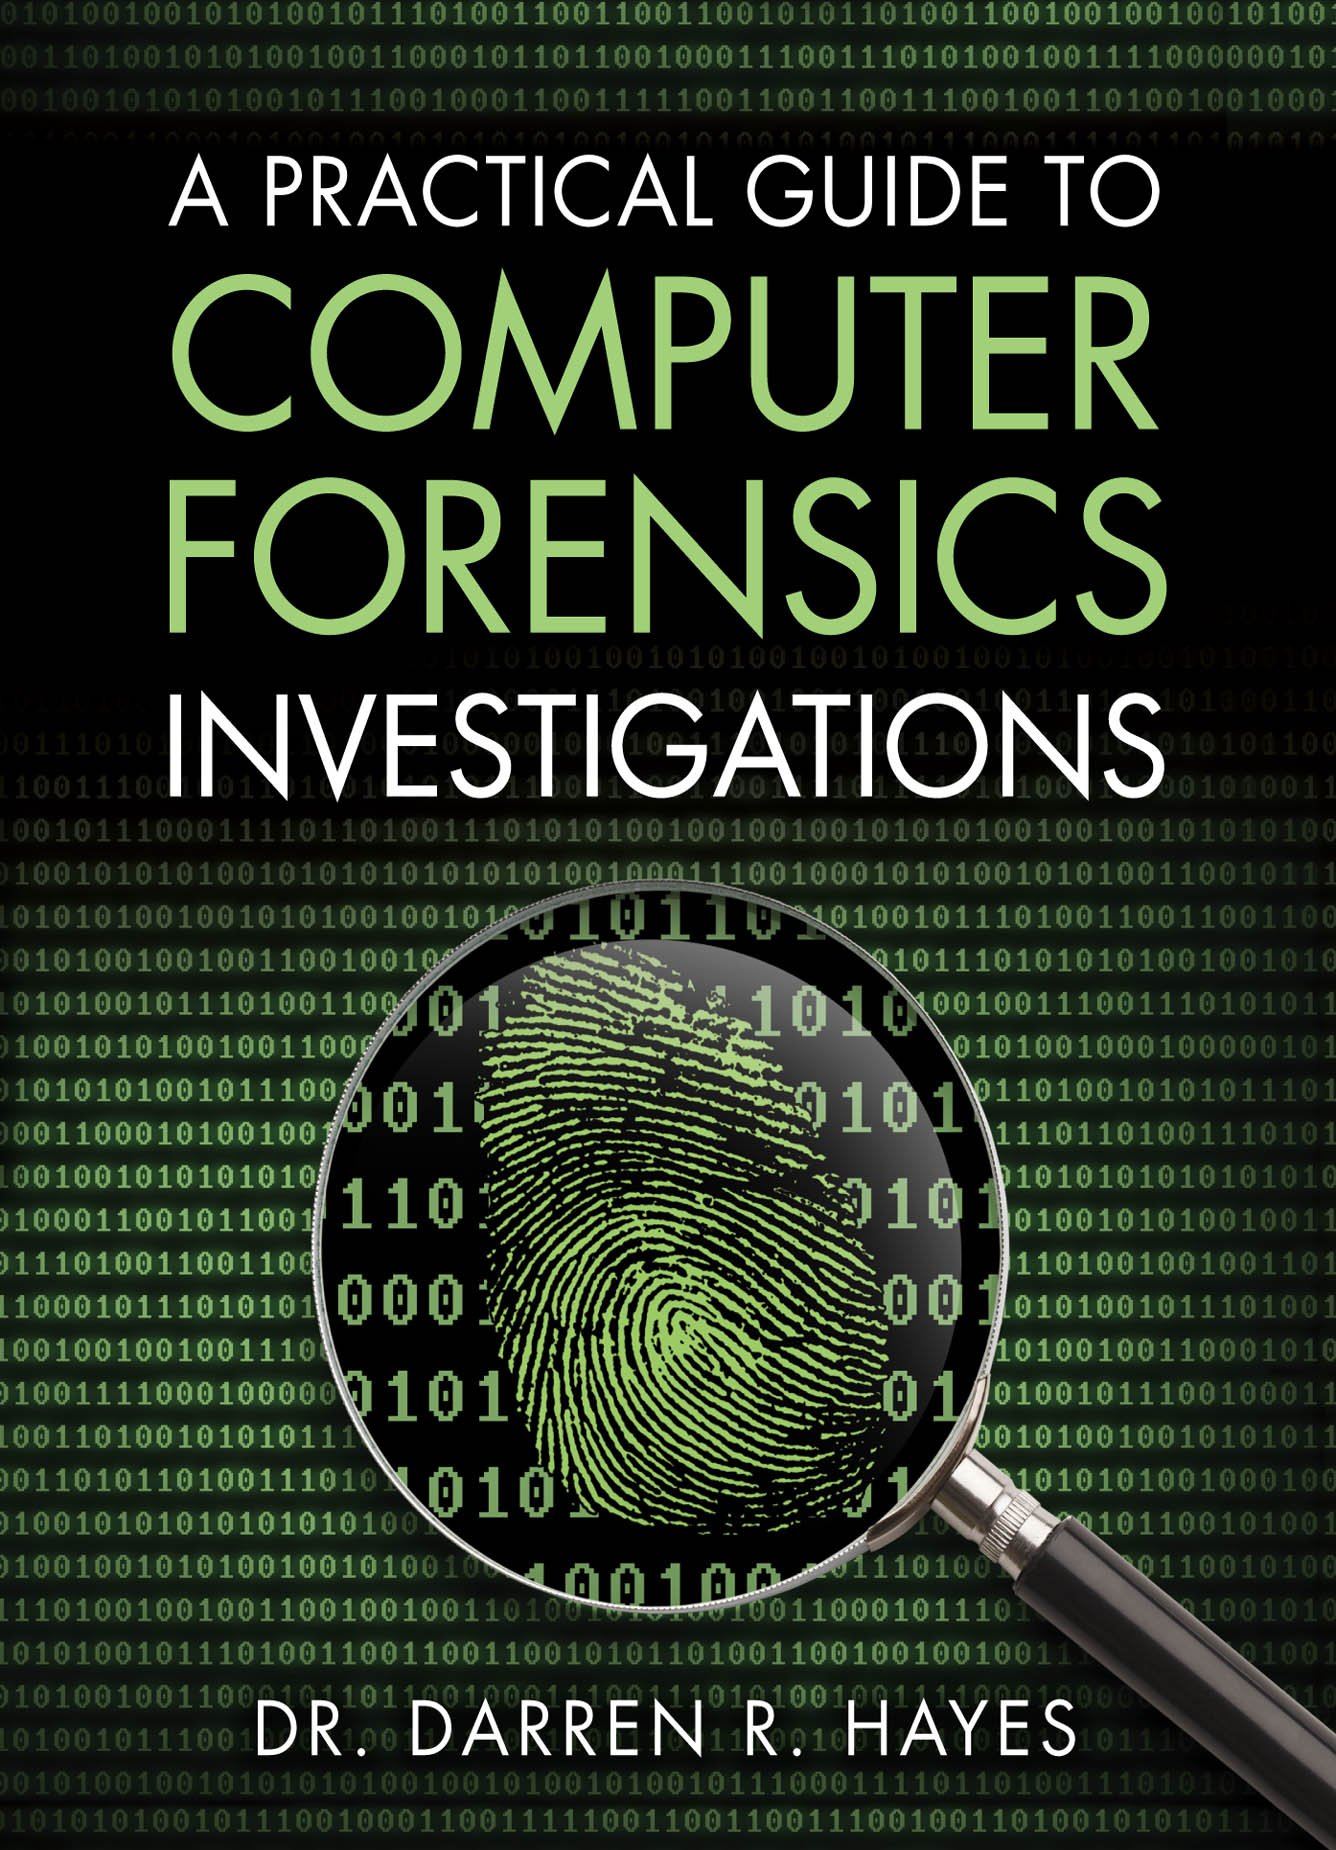 Practical Guide to Computer Forensics Investigations, A - 50-99.99